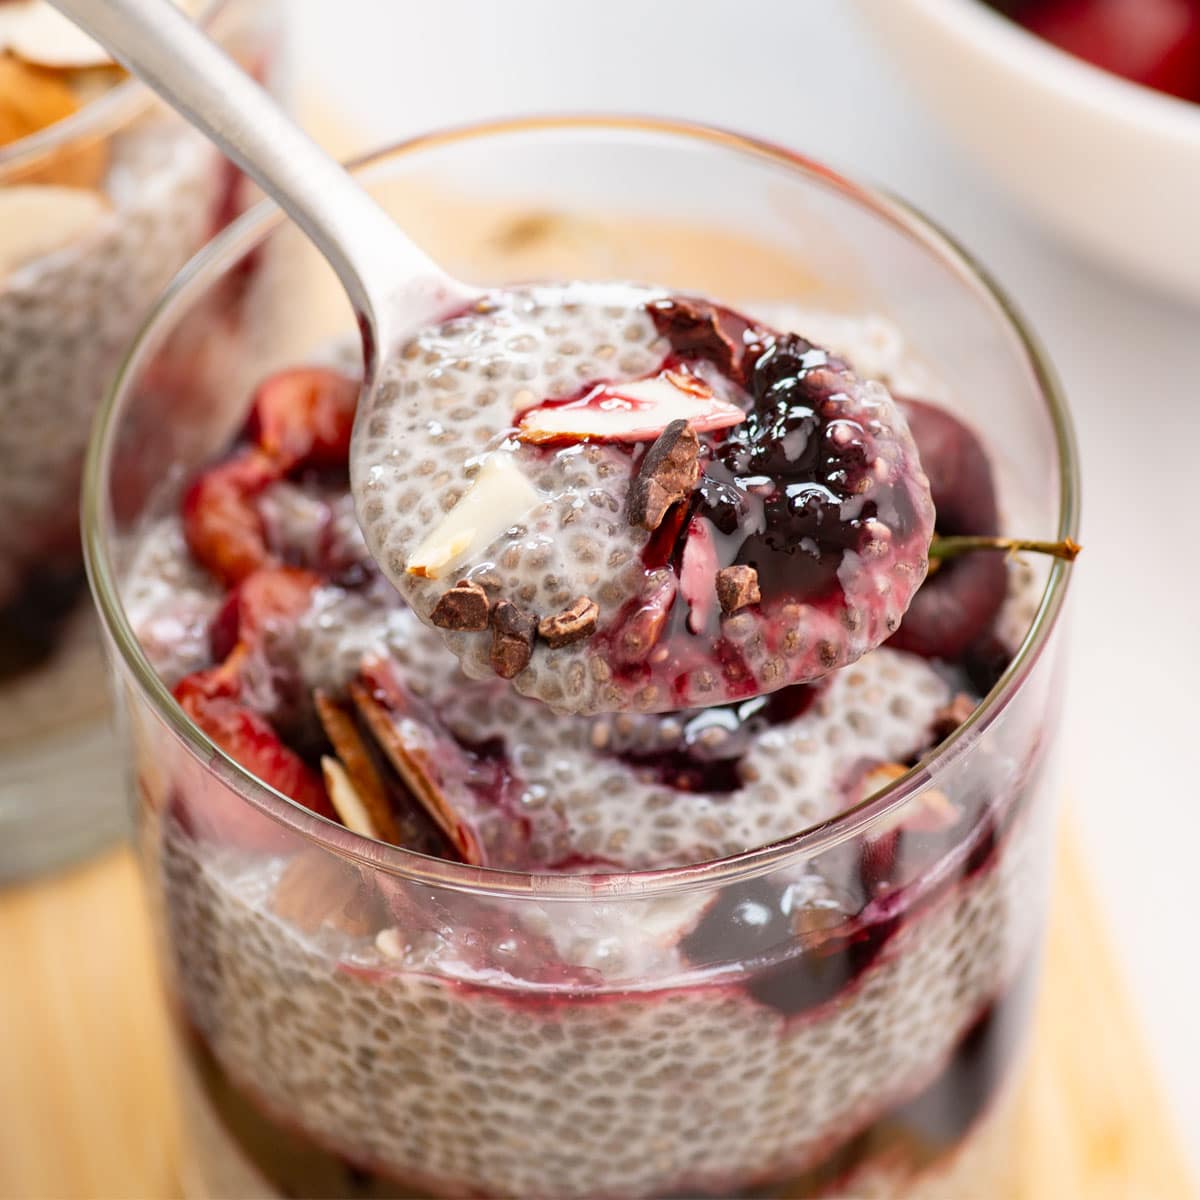 spoonful of chia seed pudding, cherry compote, almonds and chocolate sauce